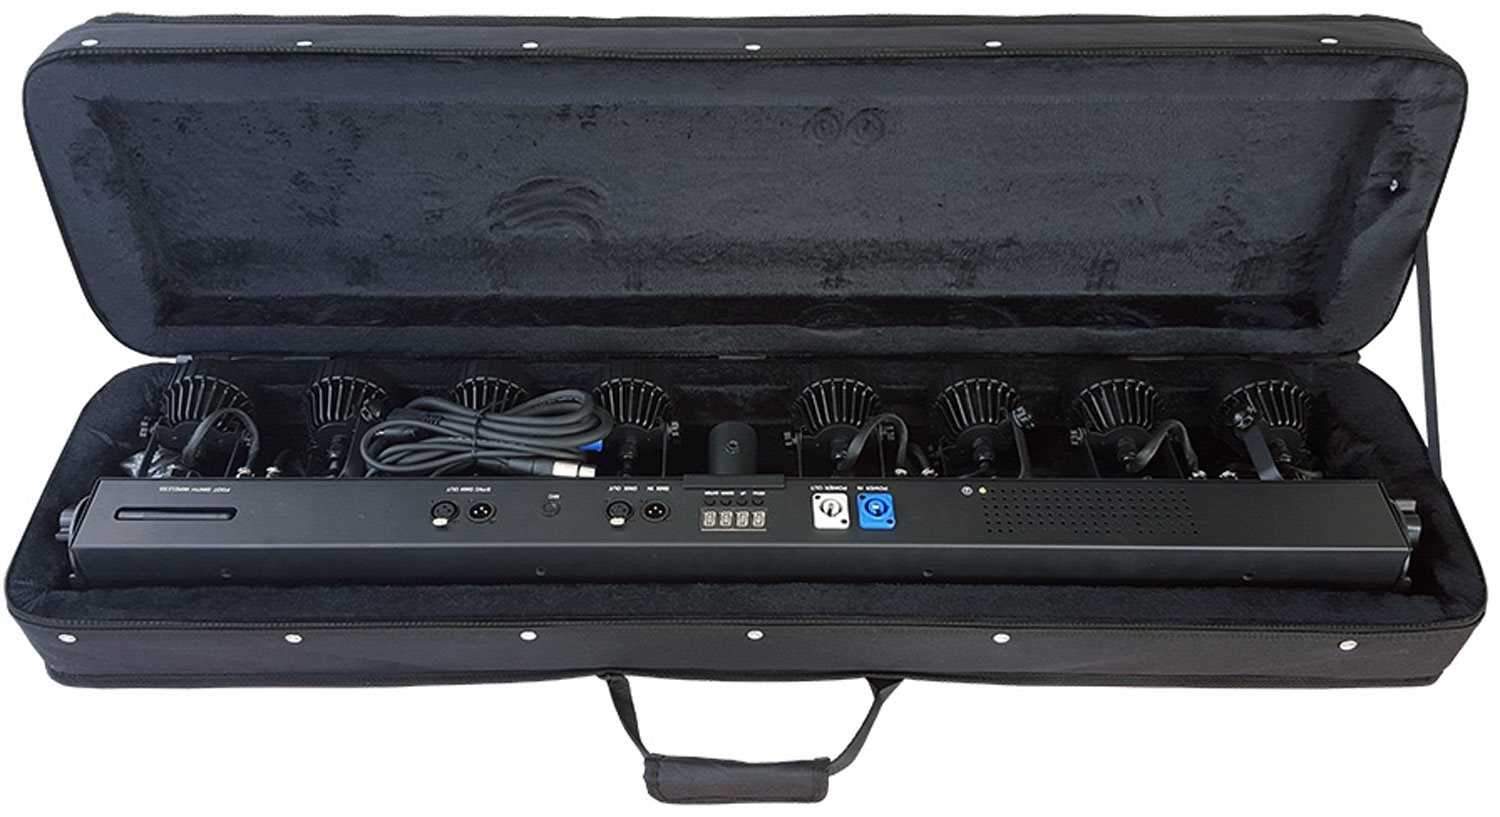 Blizzard Weather System EXA RGBAWUV LED Bar - PSSL ProSound and Stage Lighting